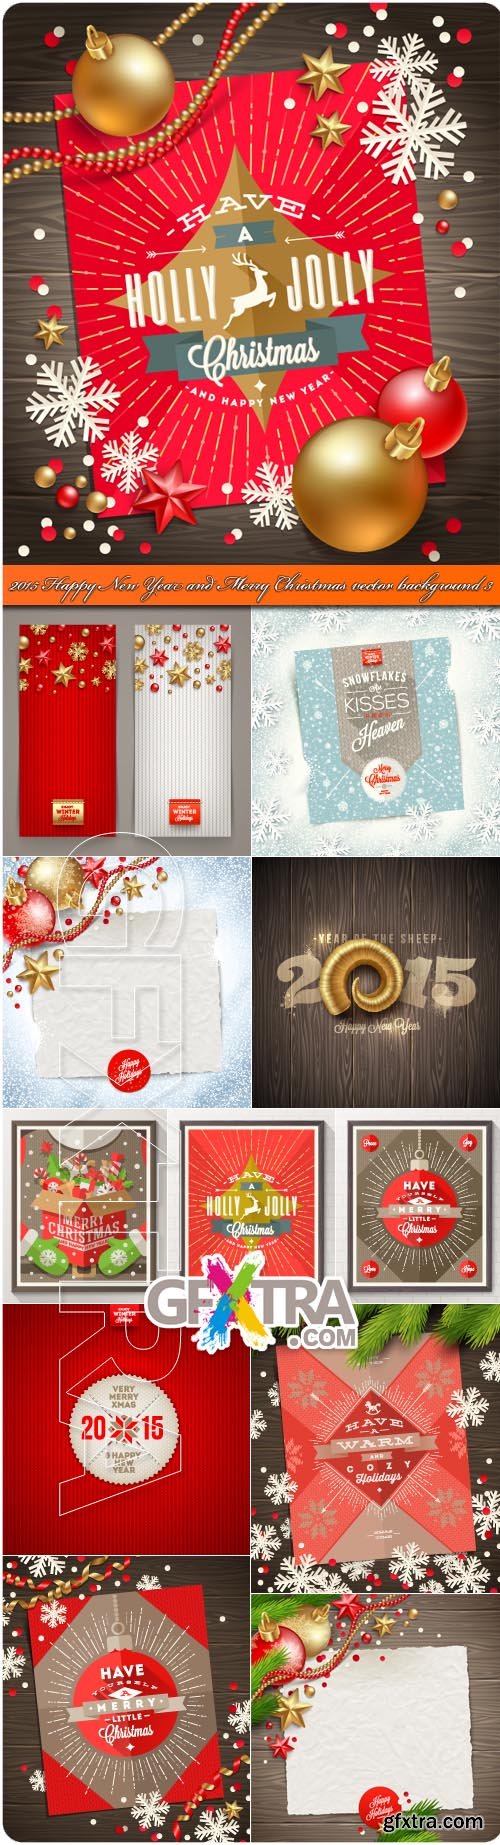 2015 Happy New Year and Merry Christmas vector background 3